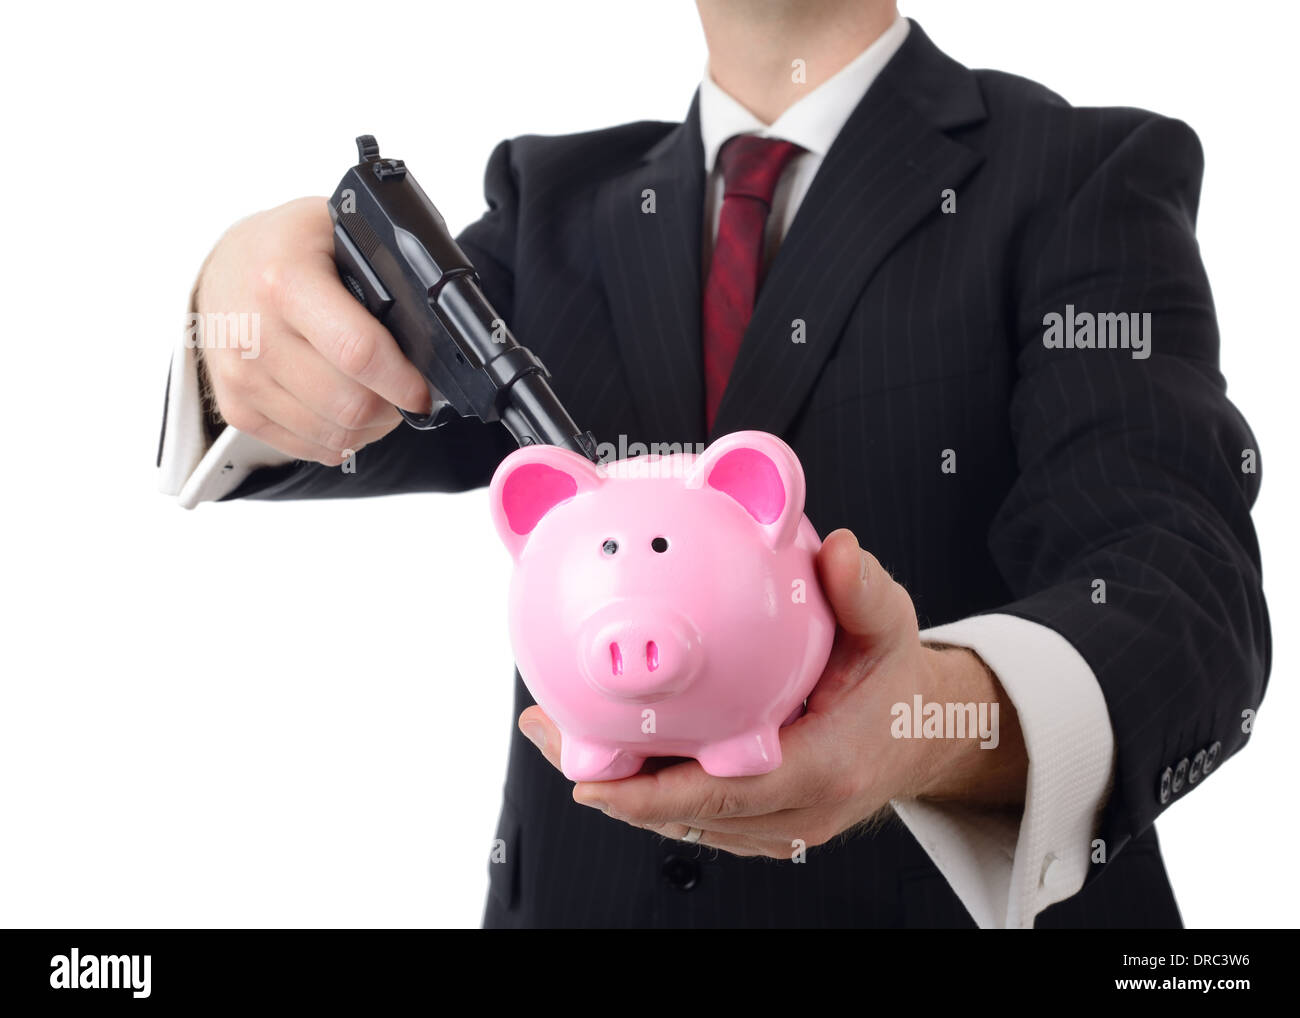 businessman holding bank to ransom with a gun isolated on a white background Stock Photo